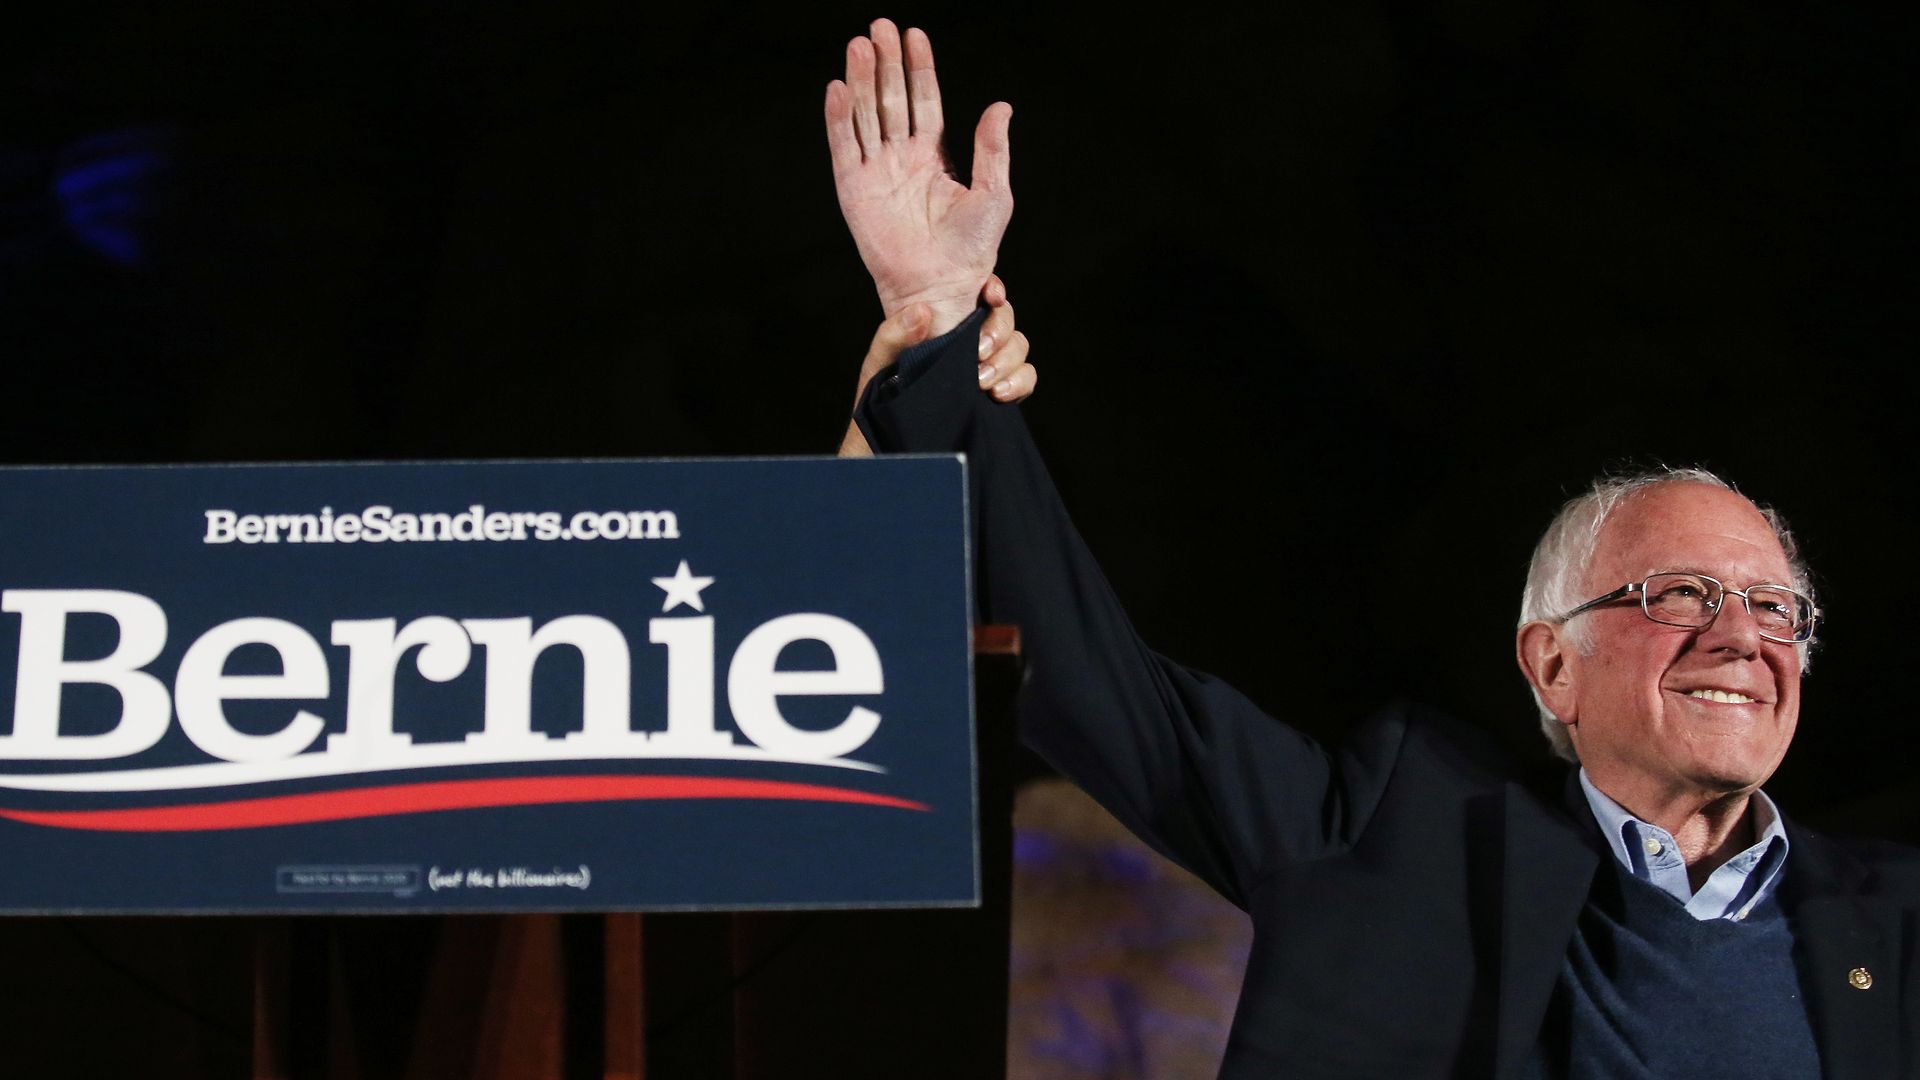 Democratic presidential candidate Sen. Bernie Sanders waves to supporters at a campaign rally on February 21, 2020 in Las Vegas